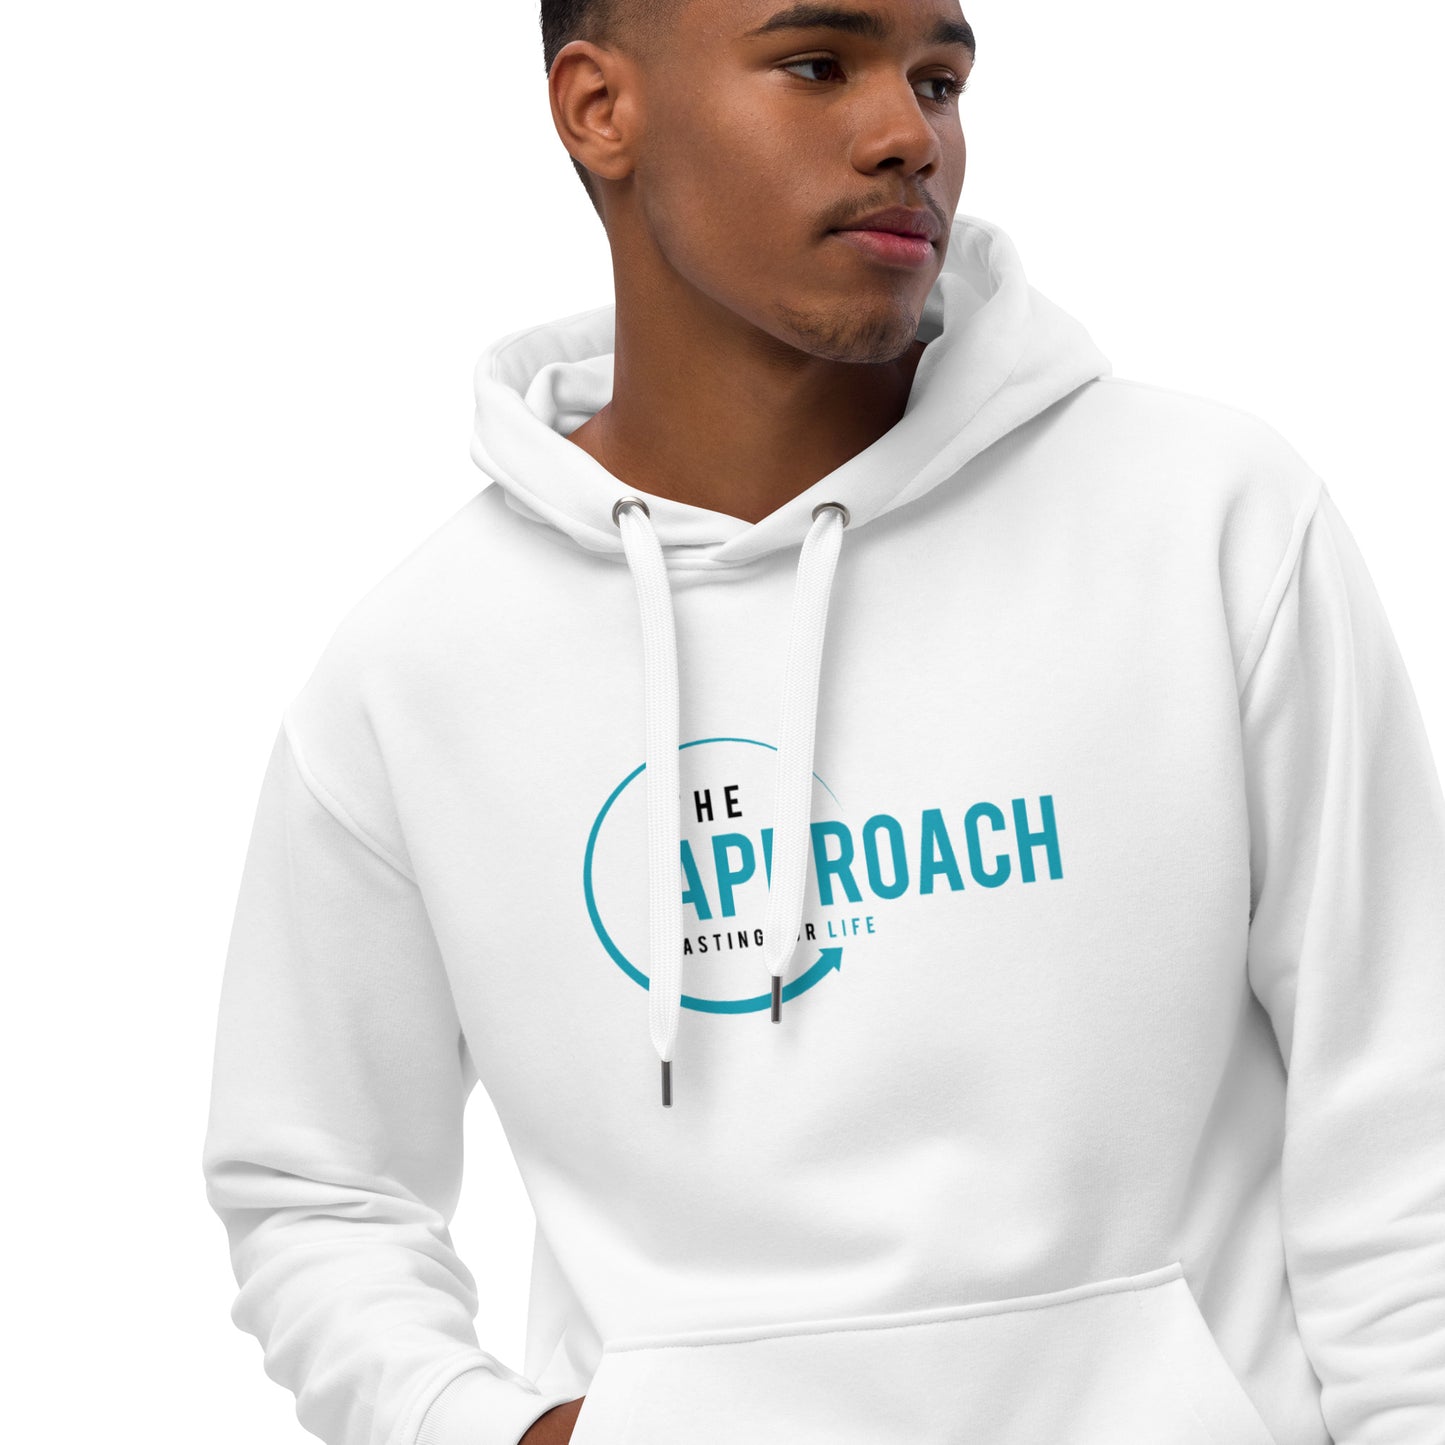 The Approach White Hoodie!